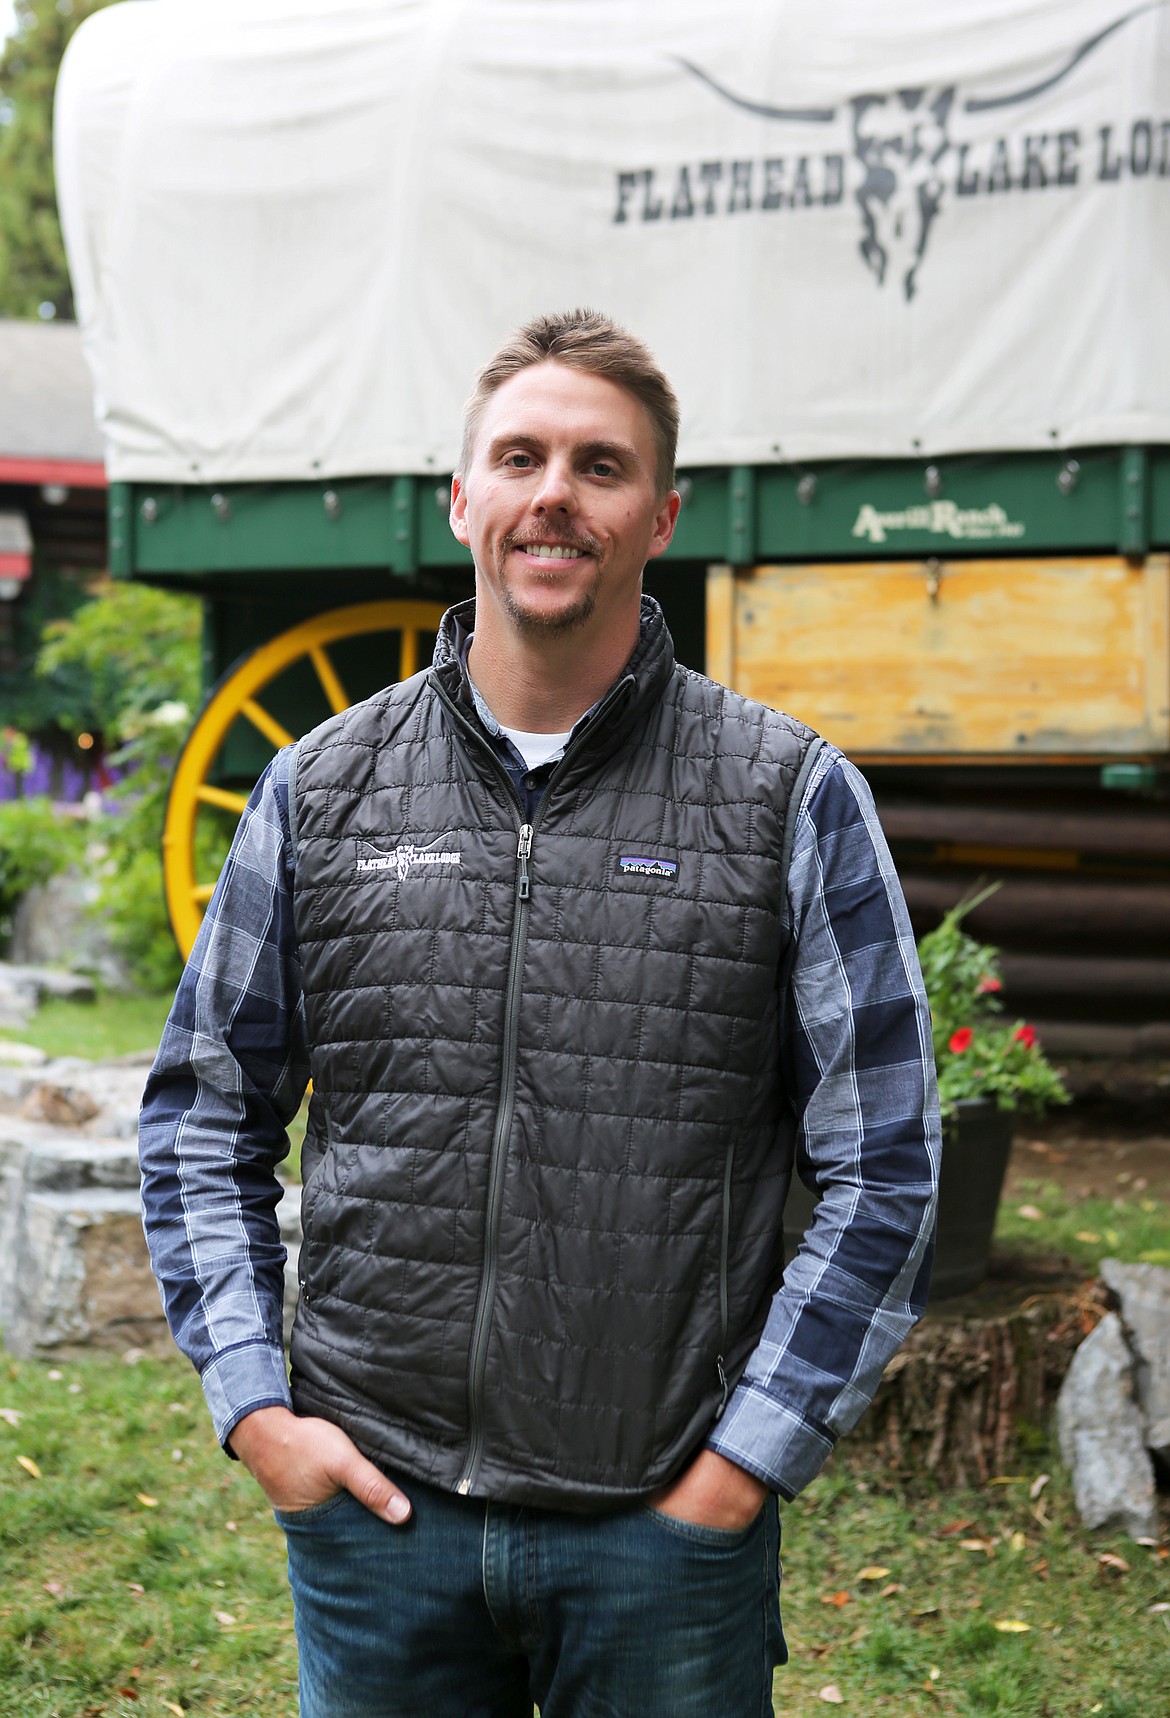 Flathead Lake Lodge general manager Chase Averill is pictured outside the lodge Wednesday, Sept. 11. To celebrate the lodge&#146;s 75th anniversary next year, the Bigfork guest ranch will host 20 children with serious medical conditions for a Week of Hope. (Mackenzie Reiss/Daily Inter Lake)